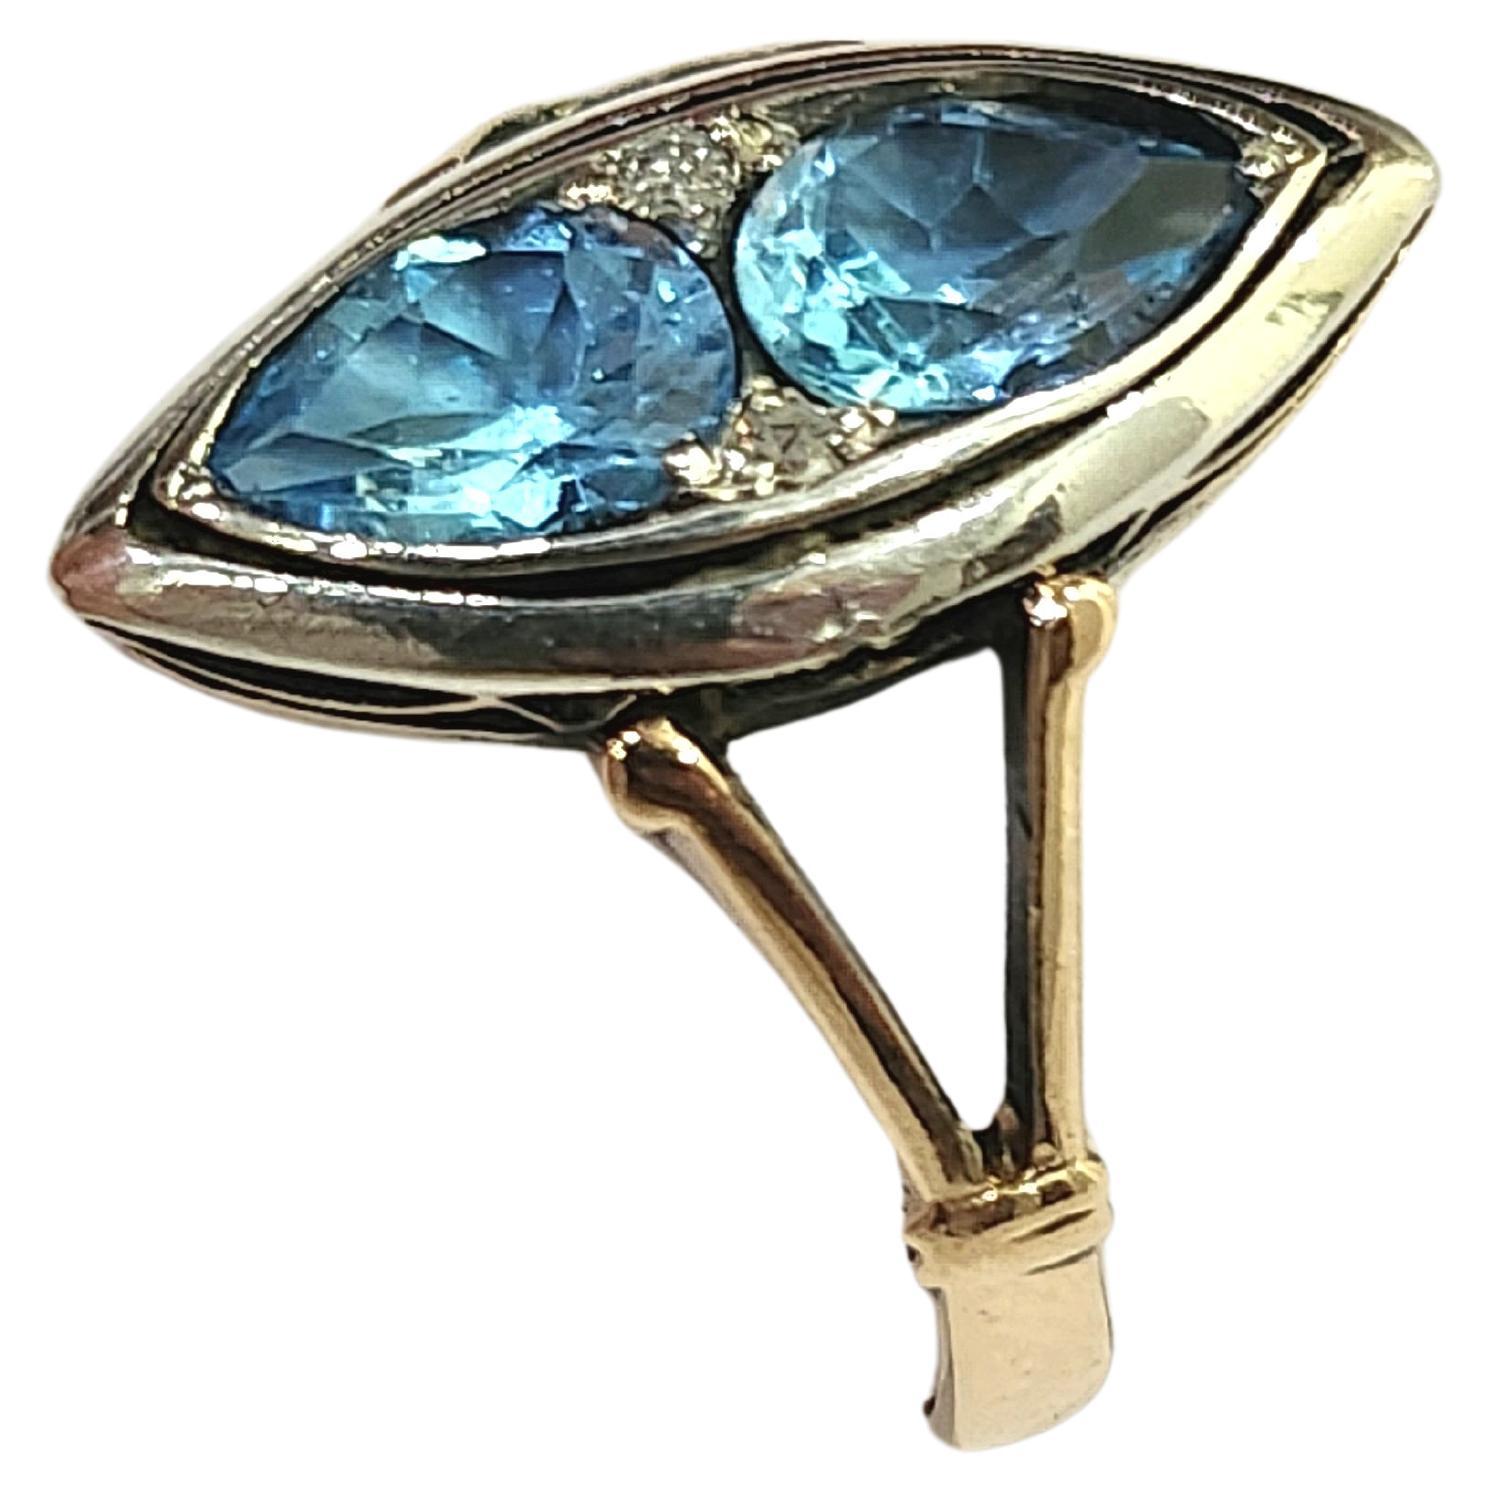 Antique artdeco era ring centered with 2 blue topaz stones in pear cut shape flanked with little diamonds in 14k gold setting topped with silver dates back to 1930s